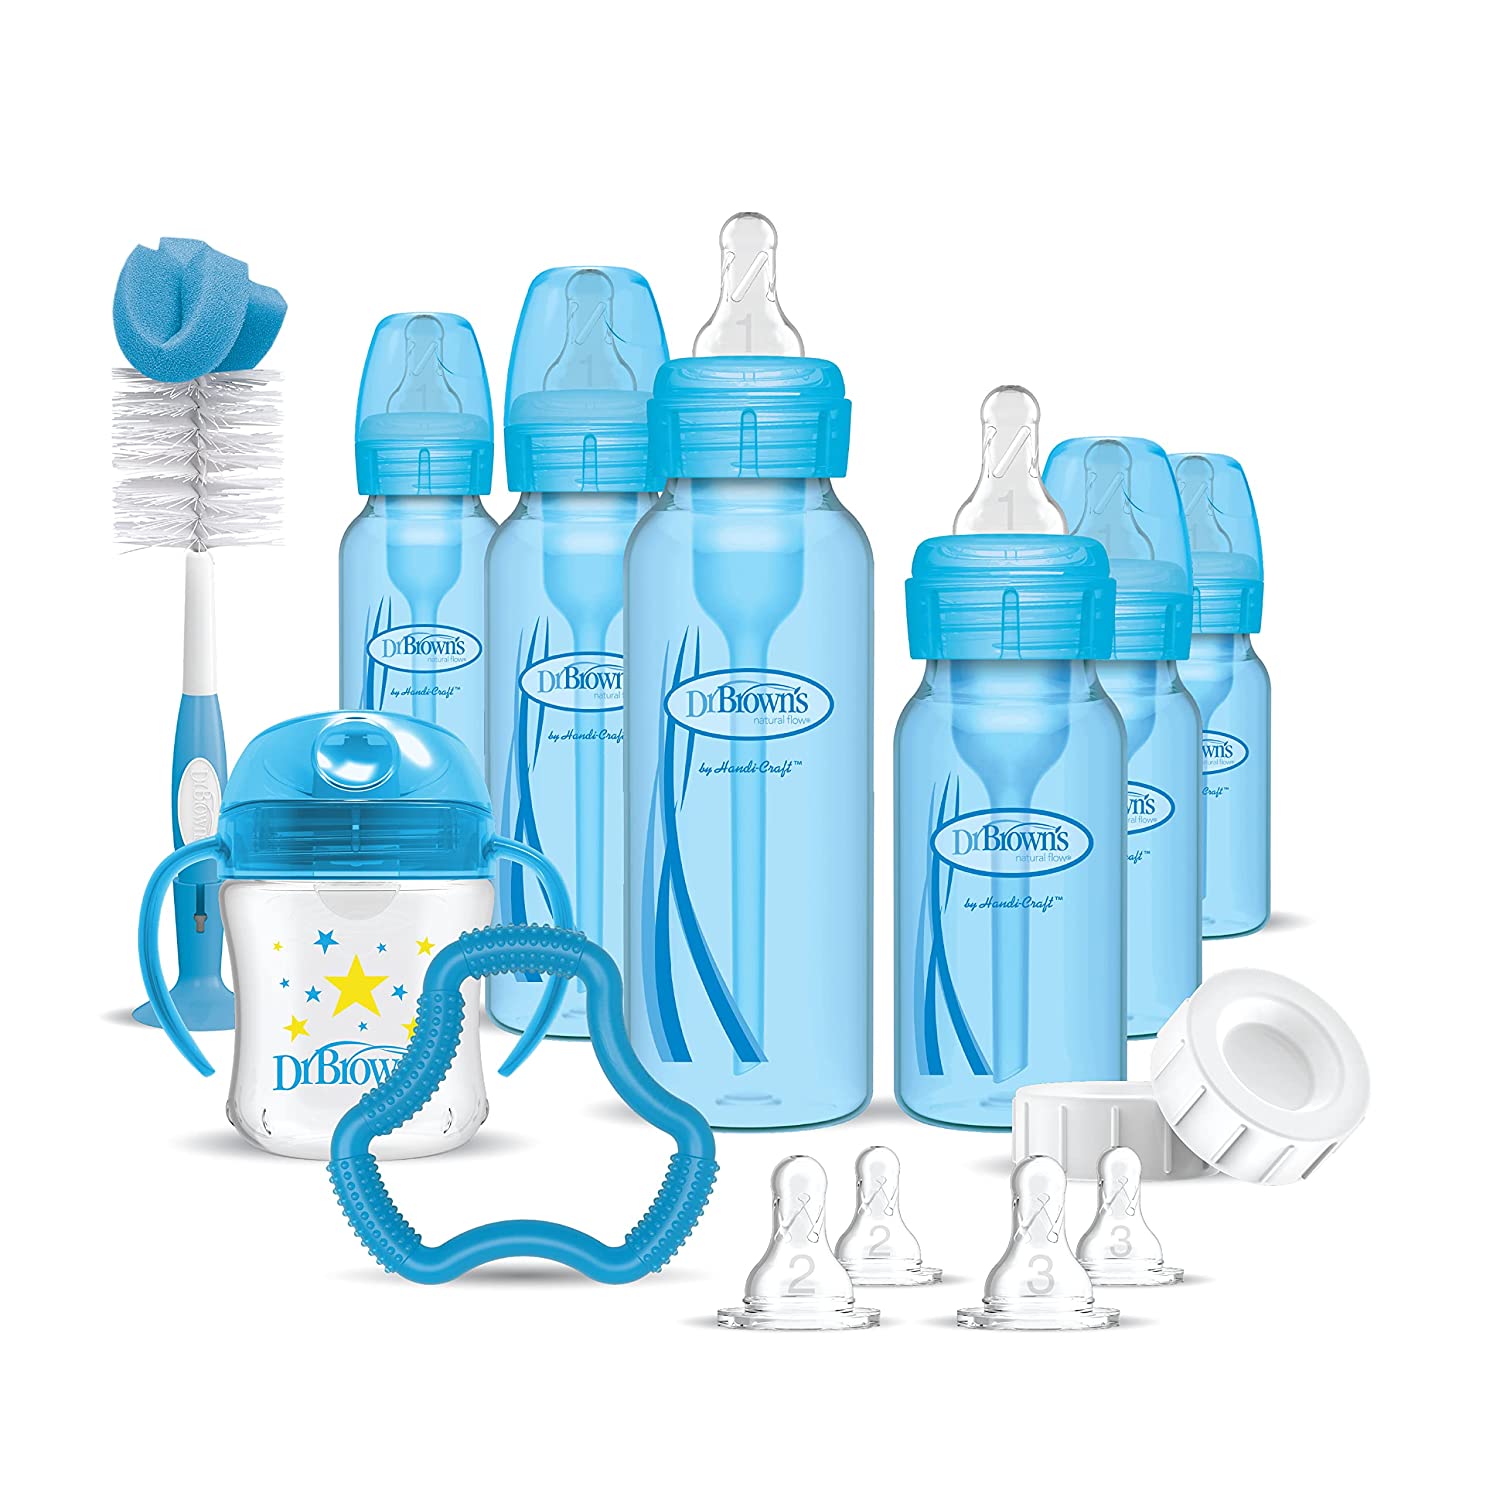 Dr. Brown's Anti-Colic Options+ First Year Bottle Gift Set with Sippy Cup, Baby Bottle Brush and Teether - Blue ( Color: First Year Gift Set, Blue )